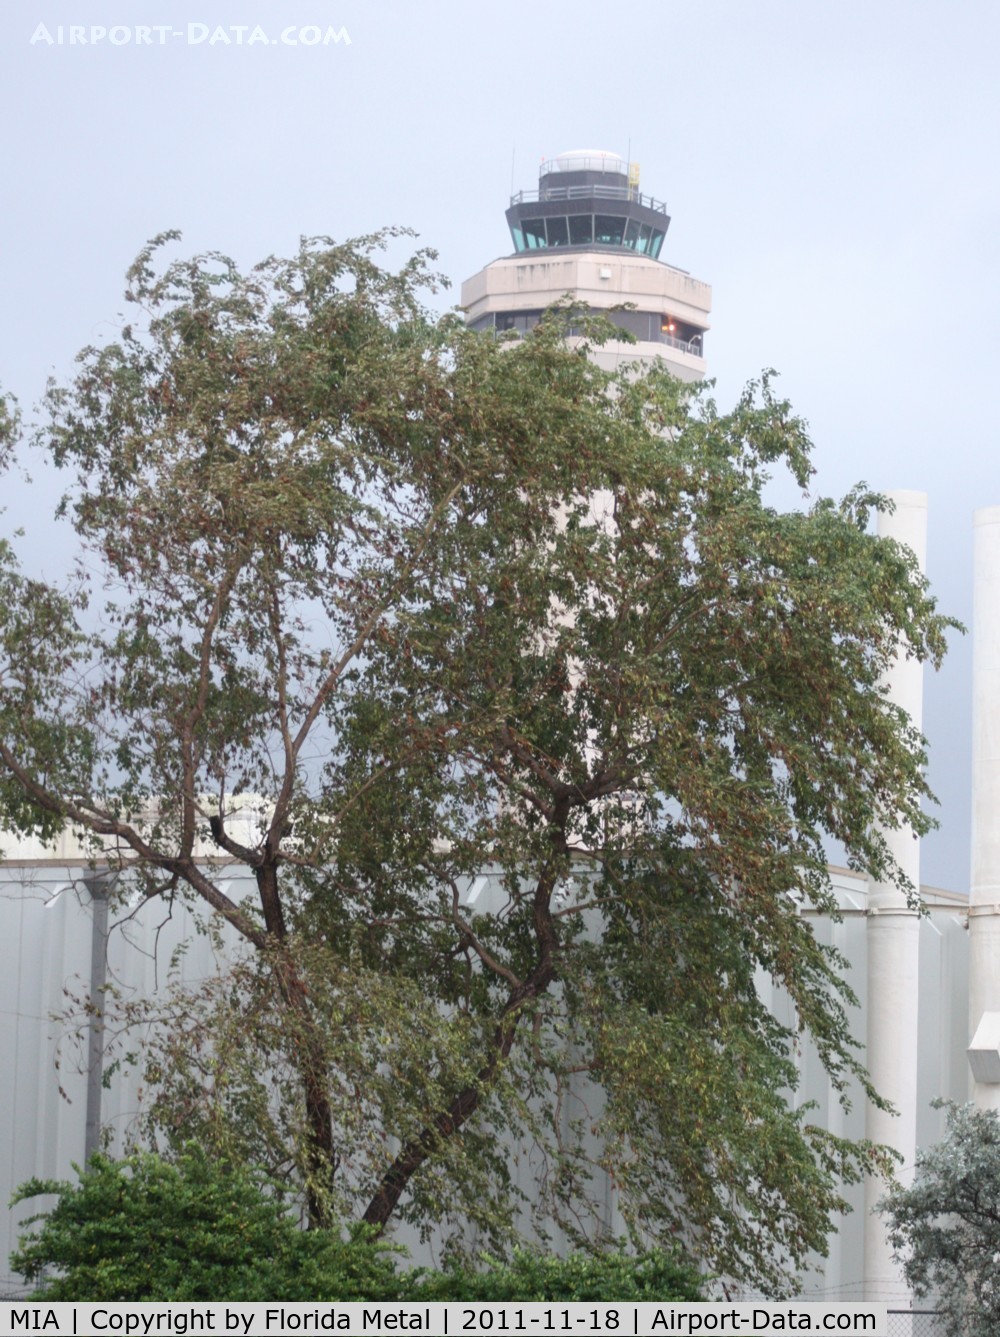 Miami International Airport (MIA) - Miami tower peaking behind trees from 25th St photo holes